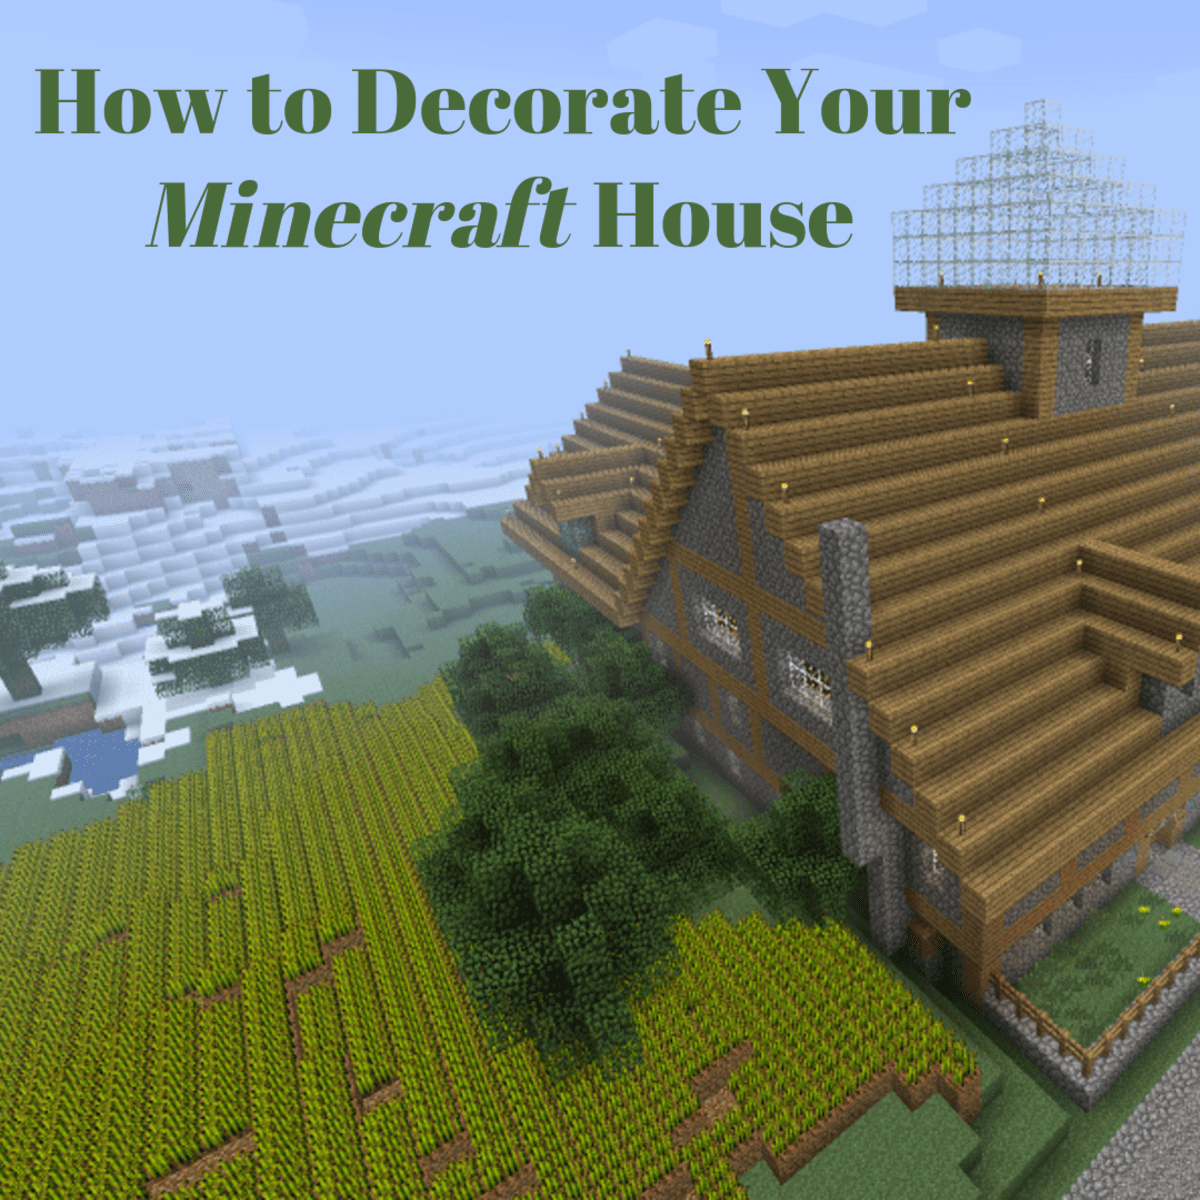 🔥 Minecraft: How to make a Defense Tower Functional / Defense